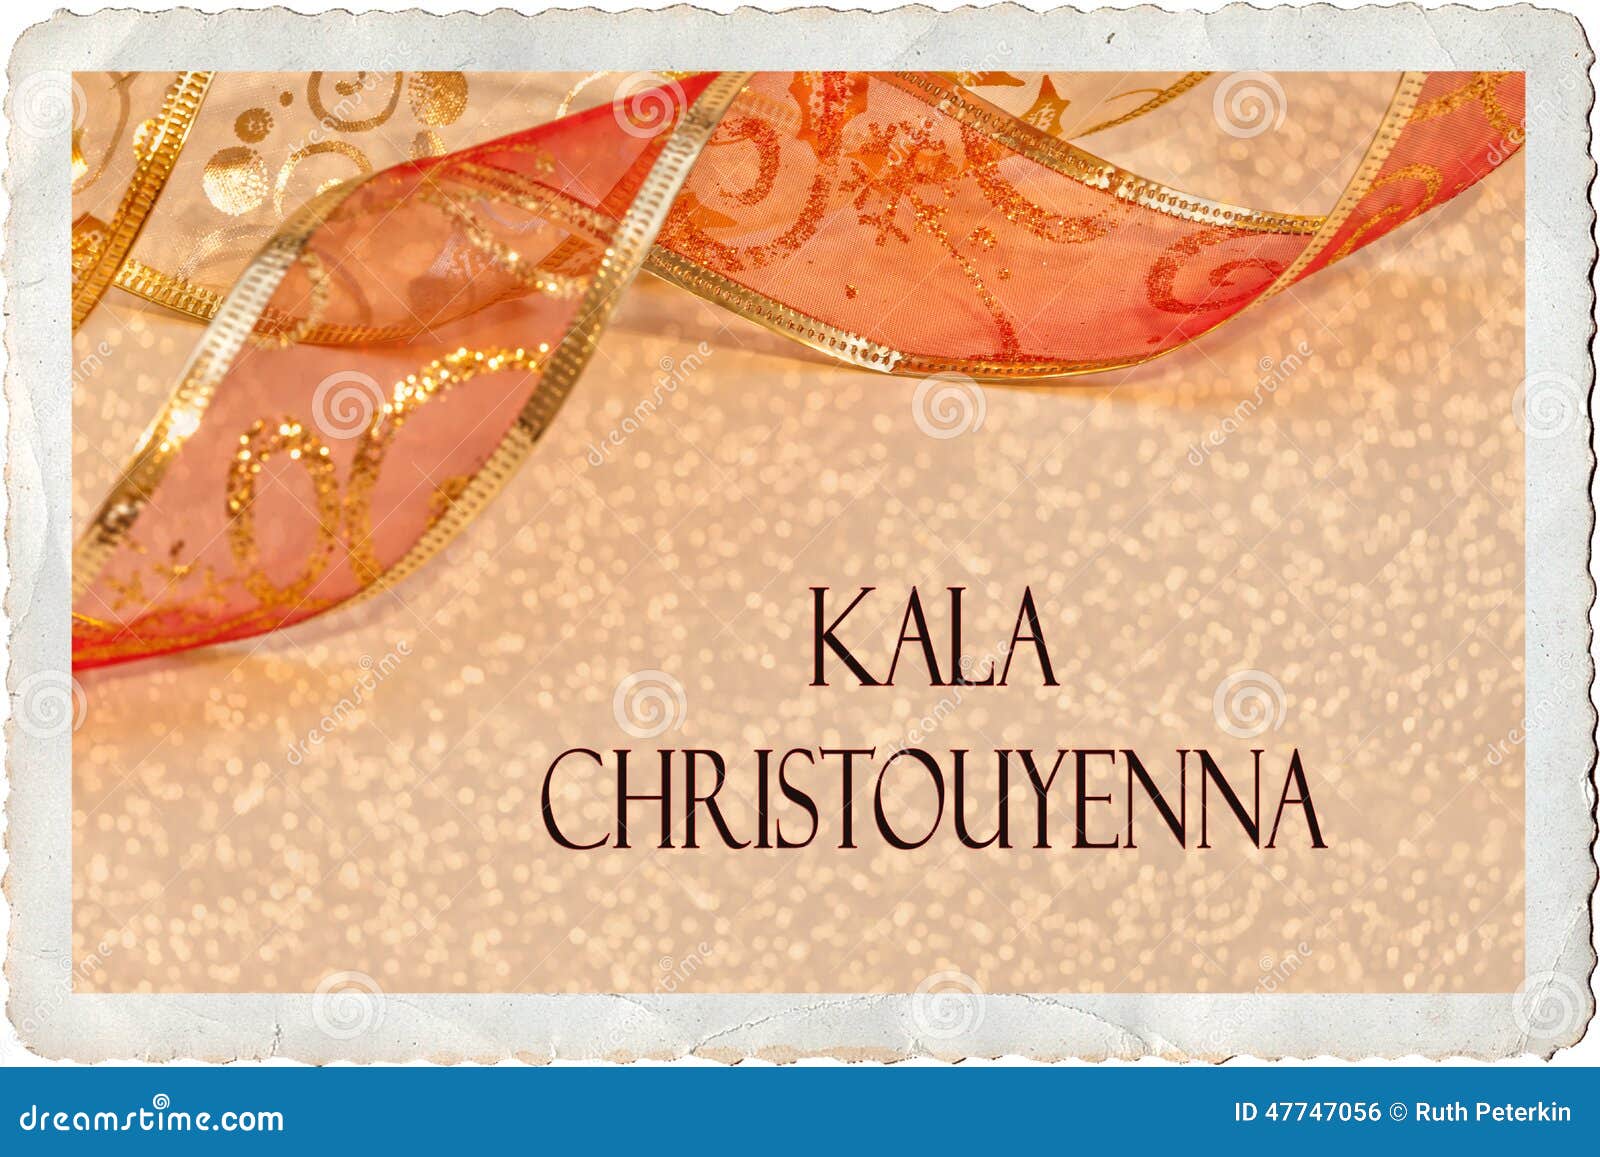 A Merry Christmas card in Greek with text ribbons and a soft light background